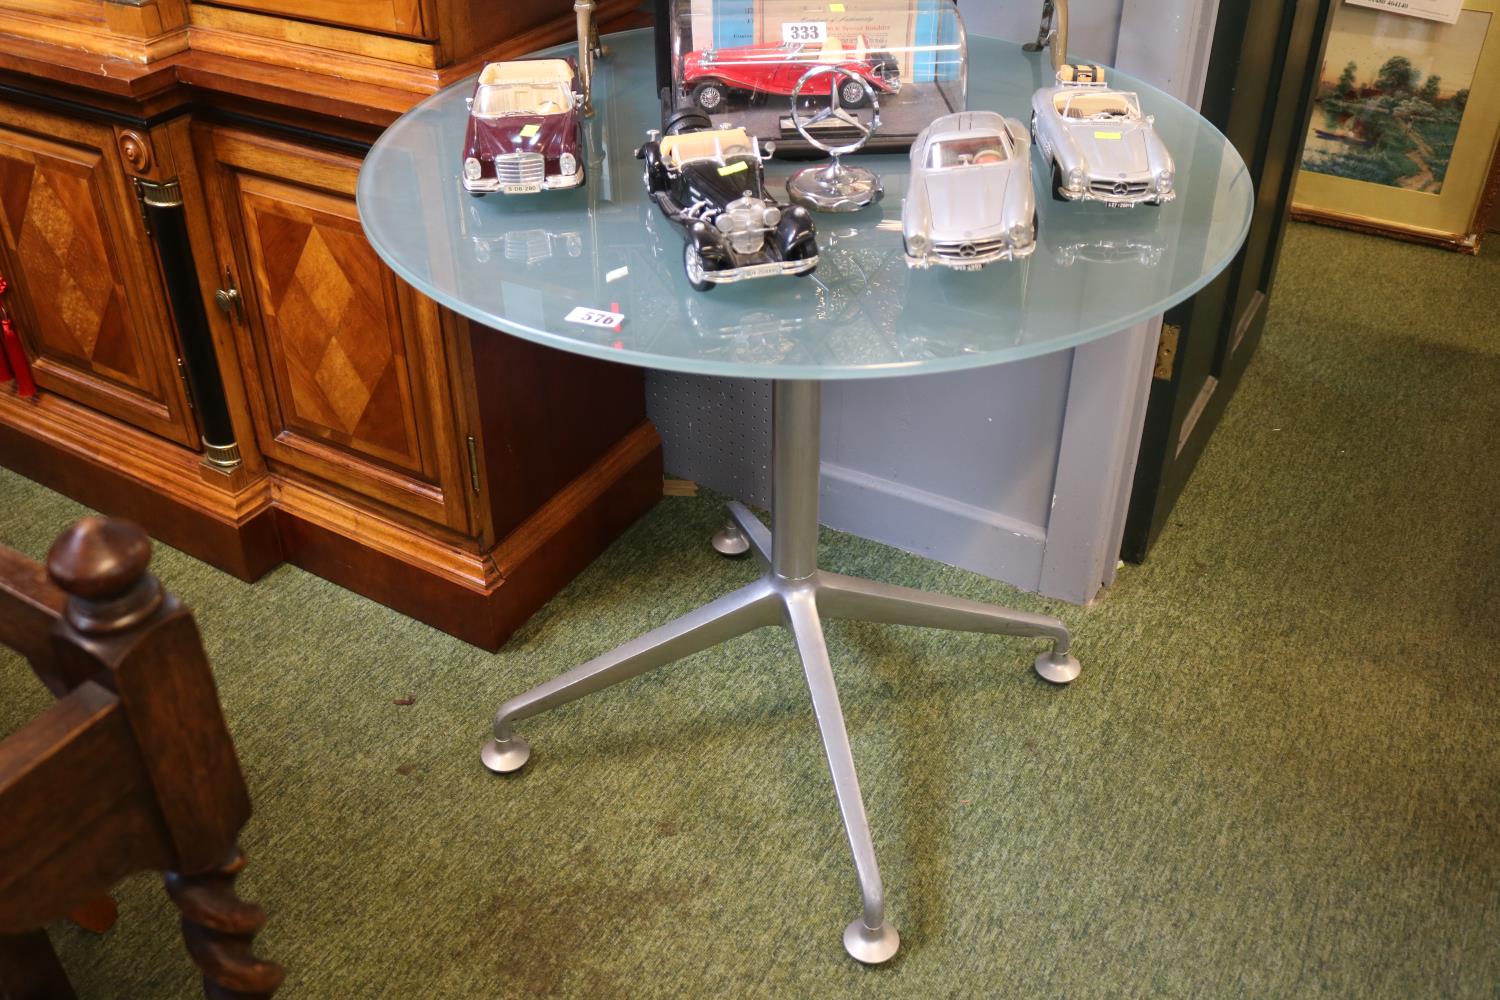 Modern Norman Foster style glass topped Metal framed table